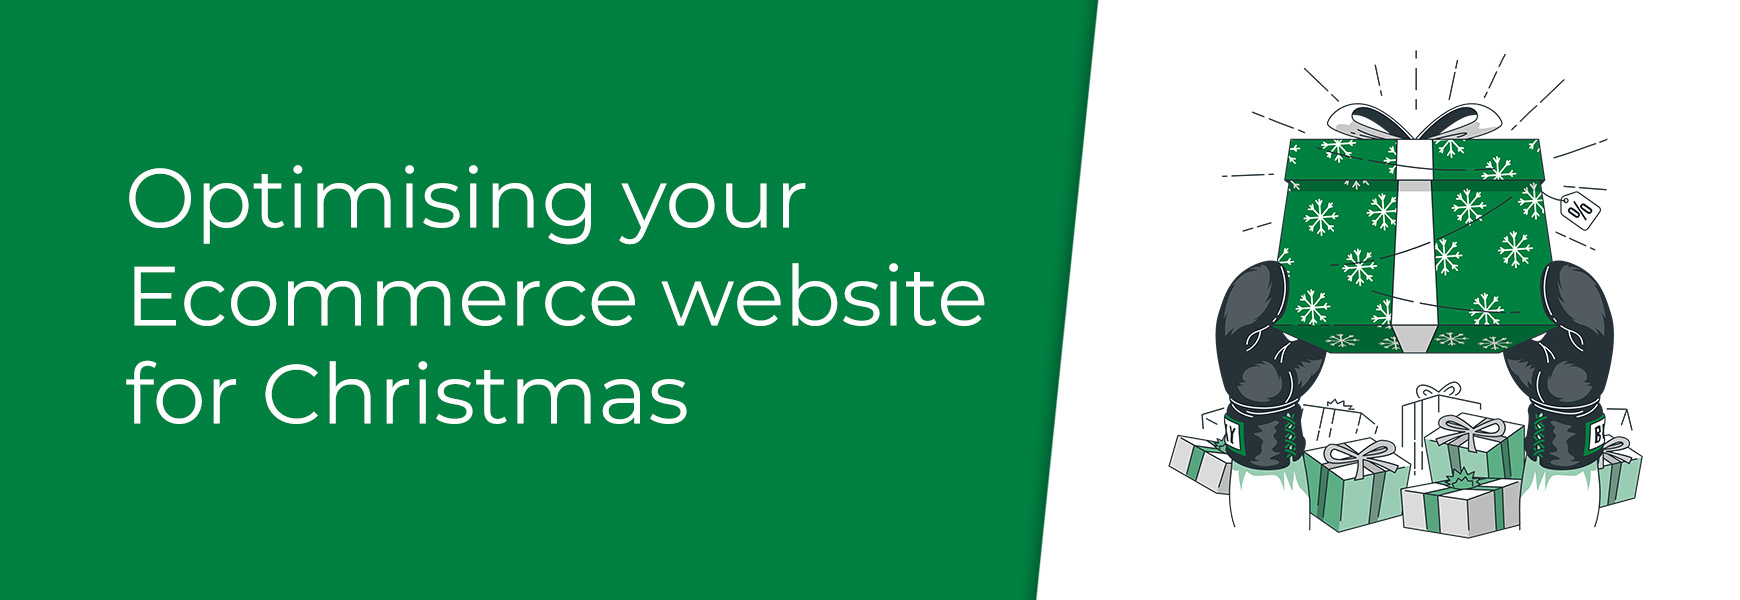 Optimising Your Ecommerce Website For Christmas